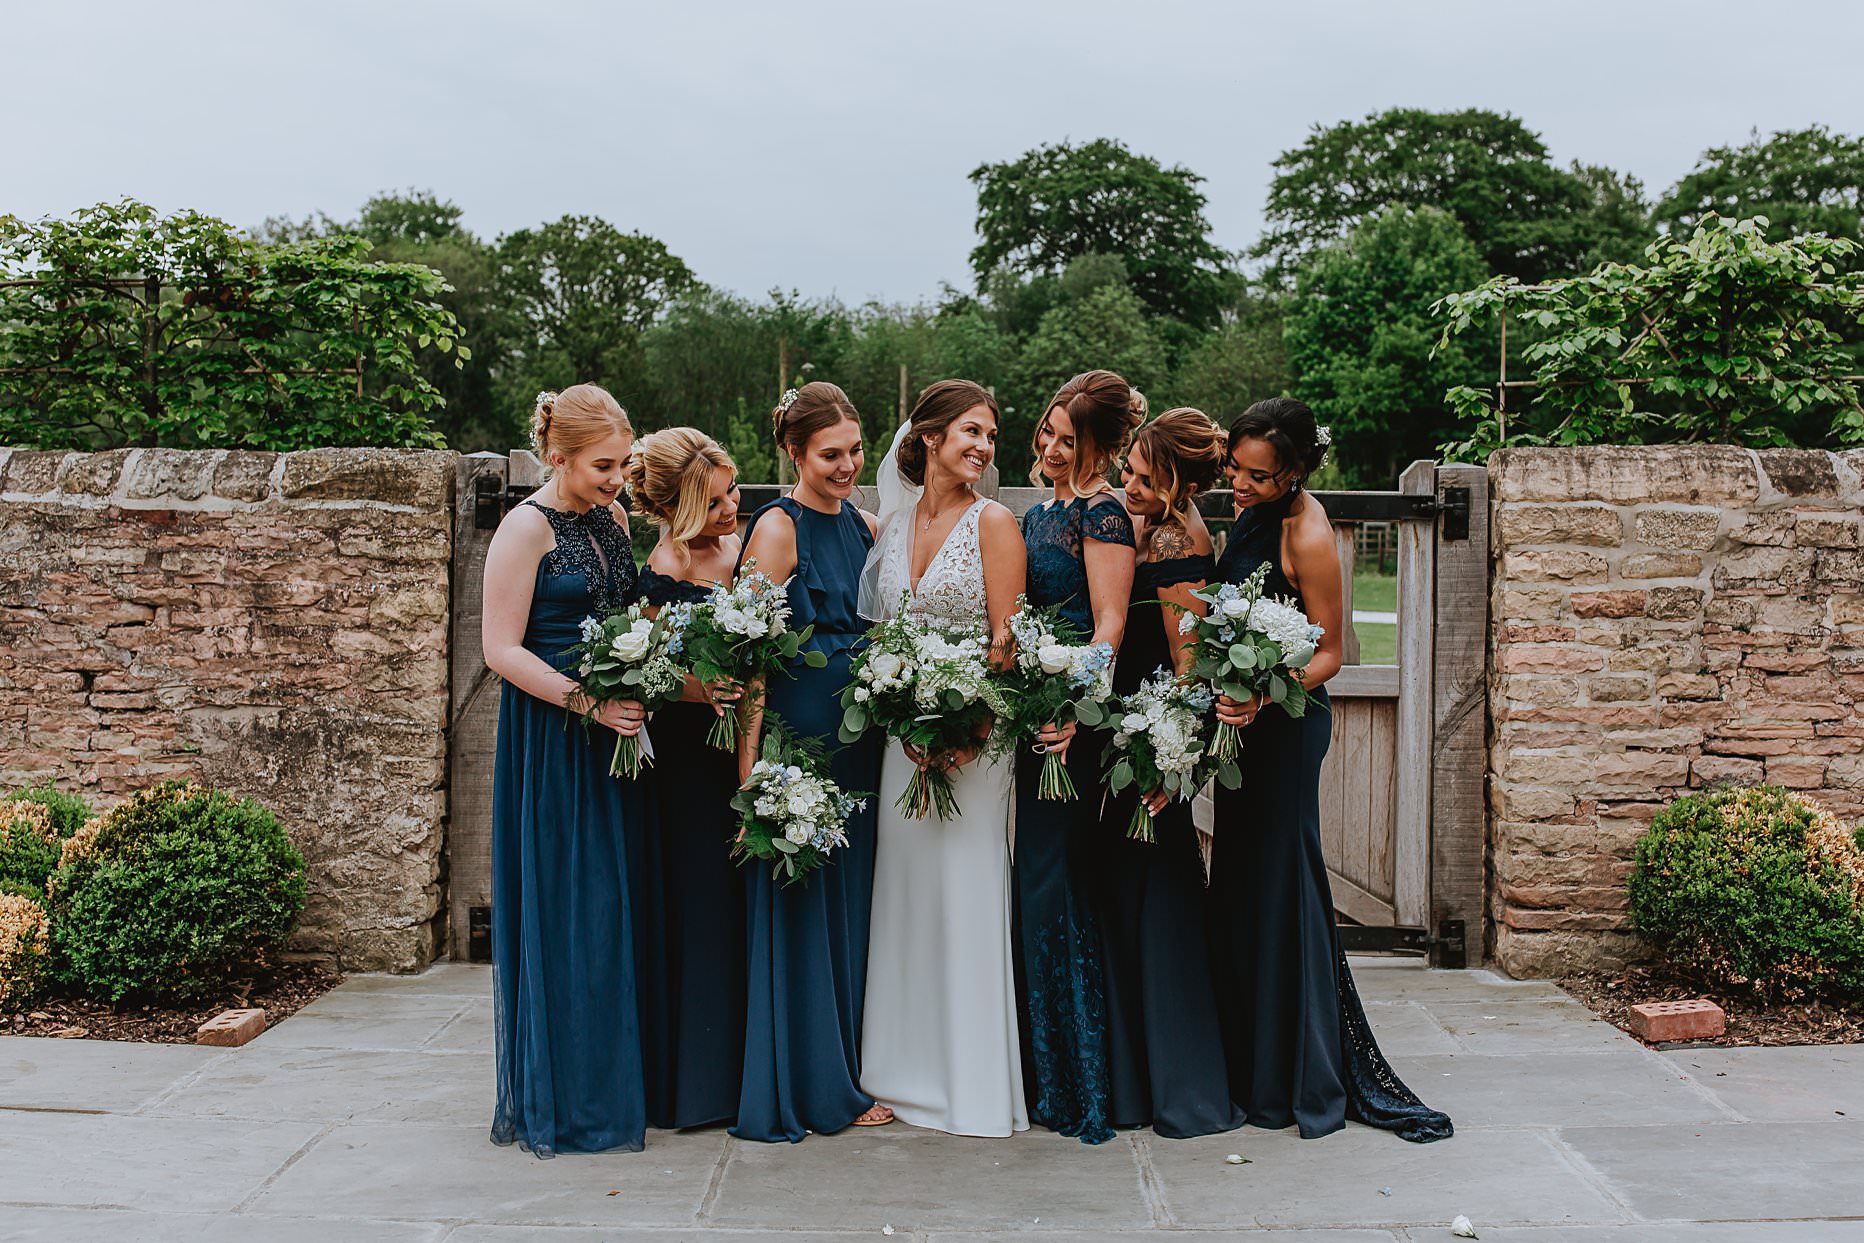 Bride and her bridesmaids stood near a brick wall talking and laughing. They are all holding bouquets of green foliage and white flowers.